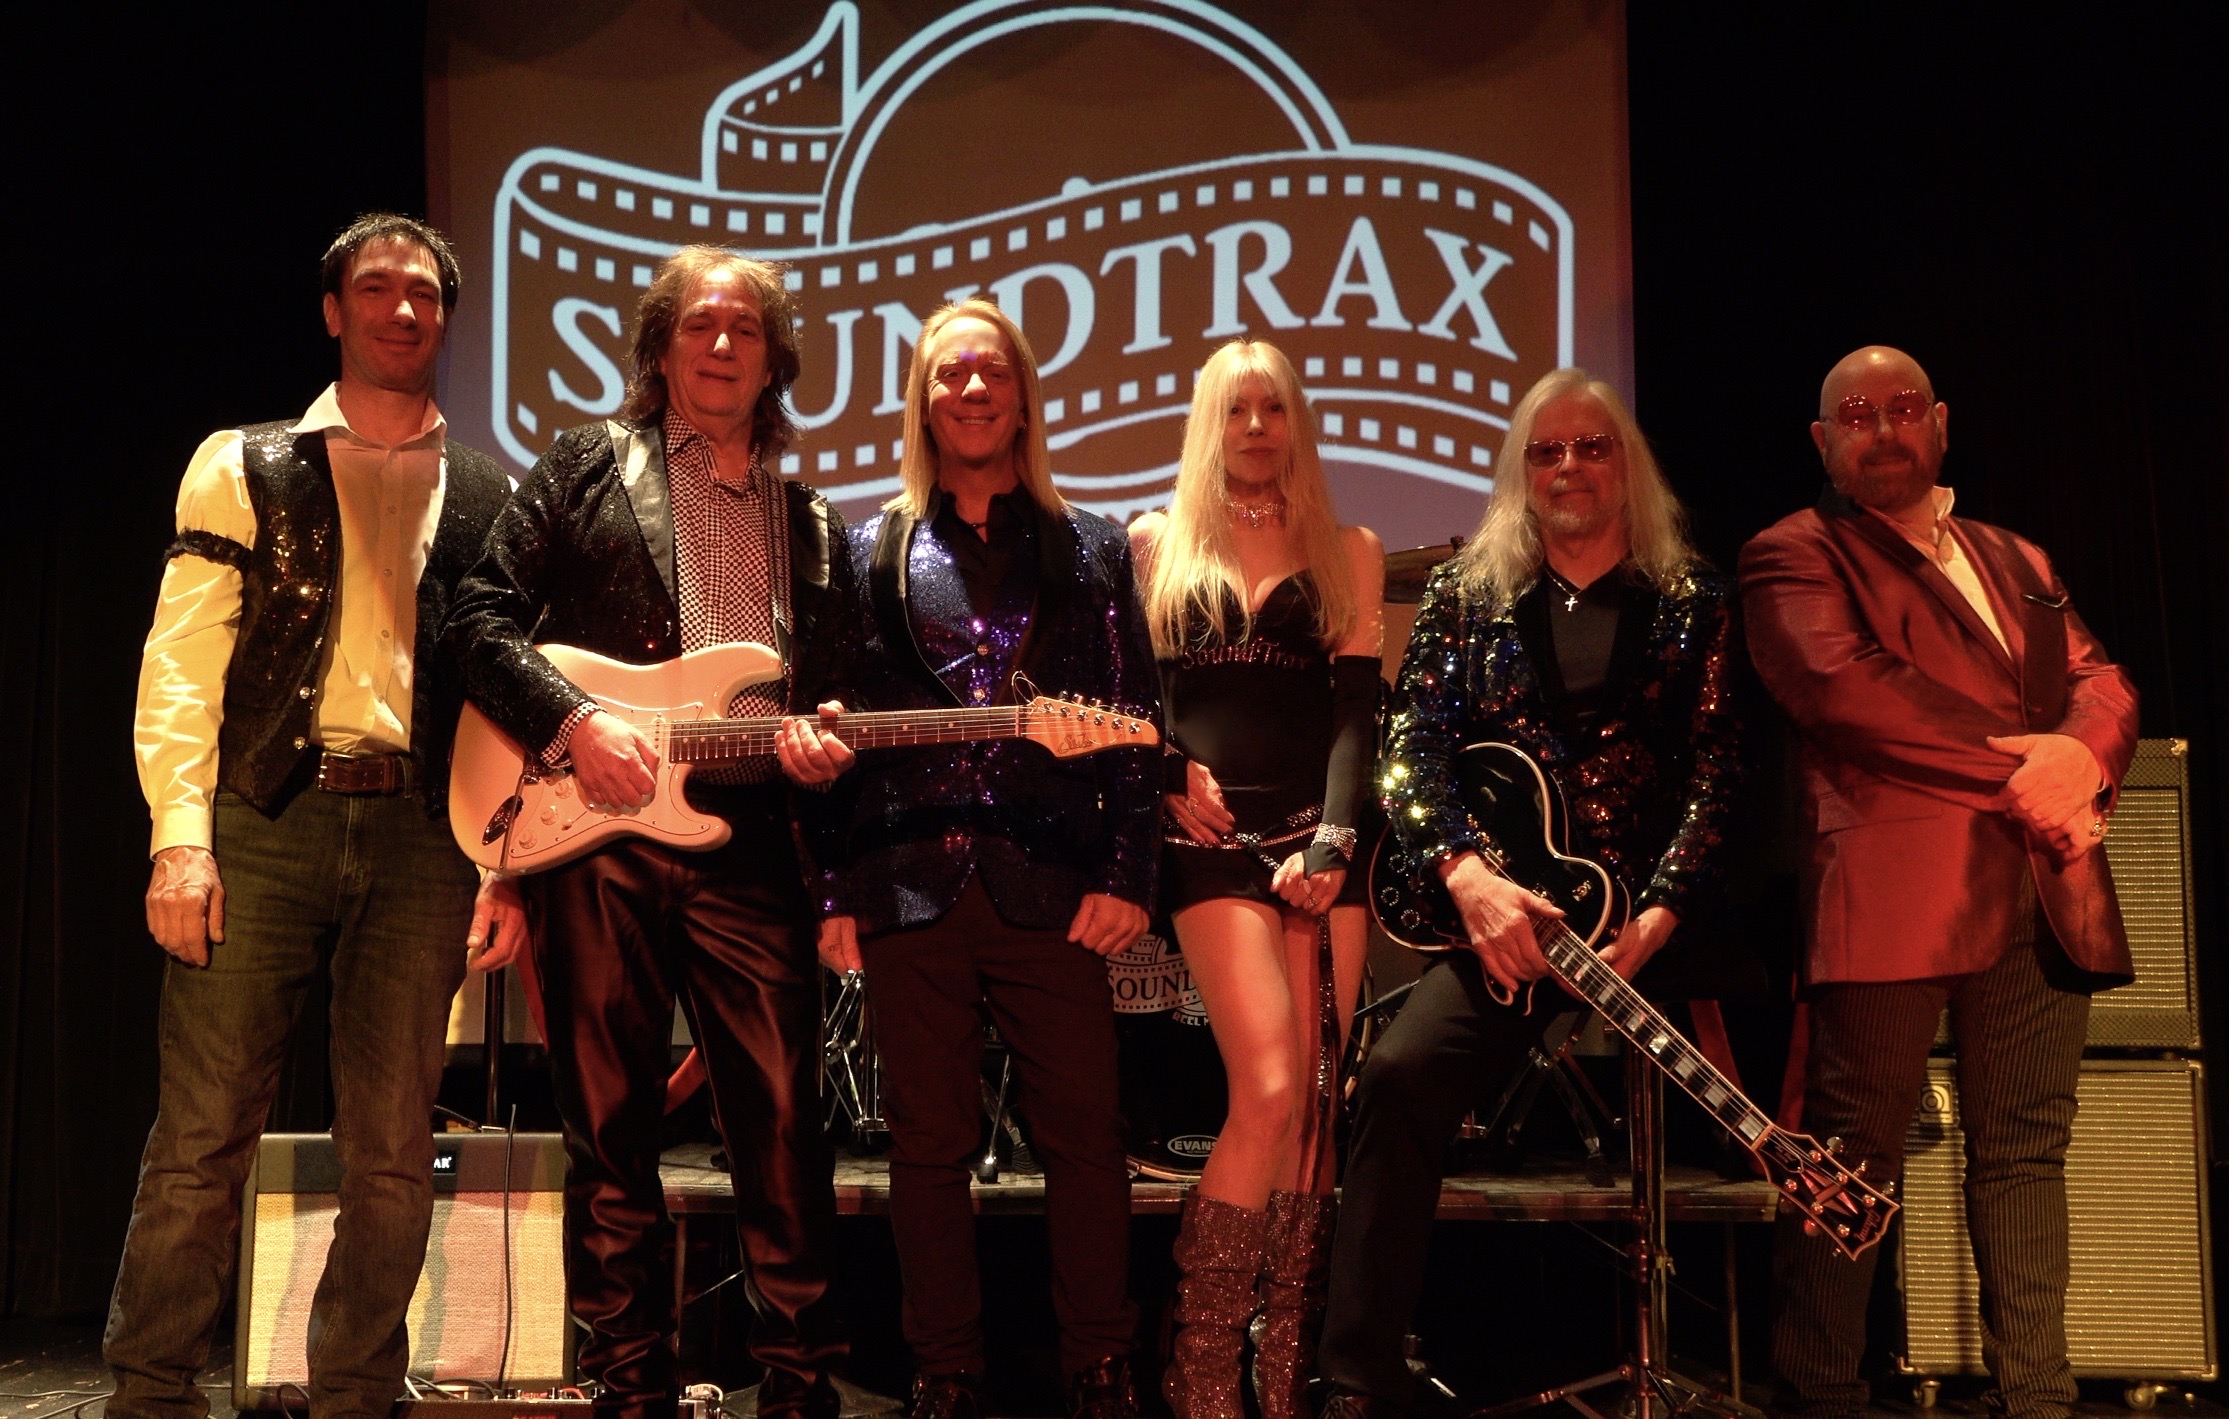 Members of the band Soundtrax.